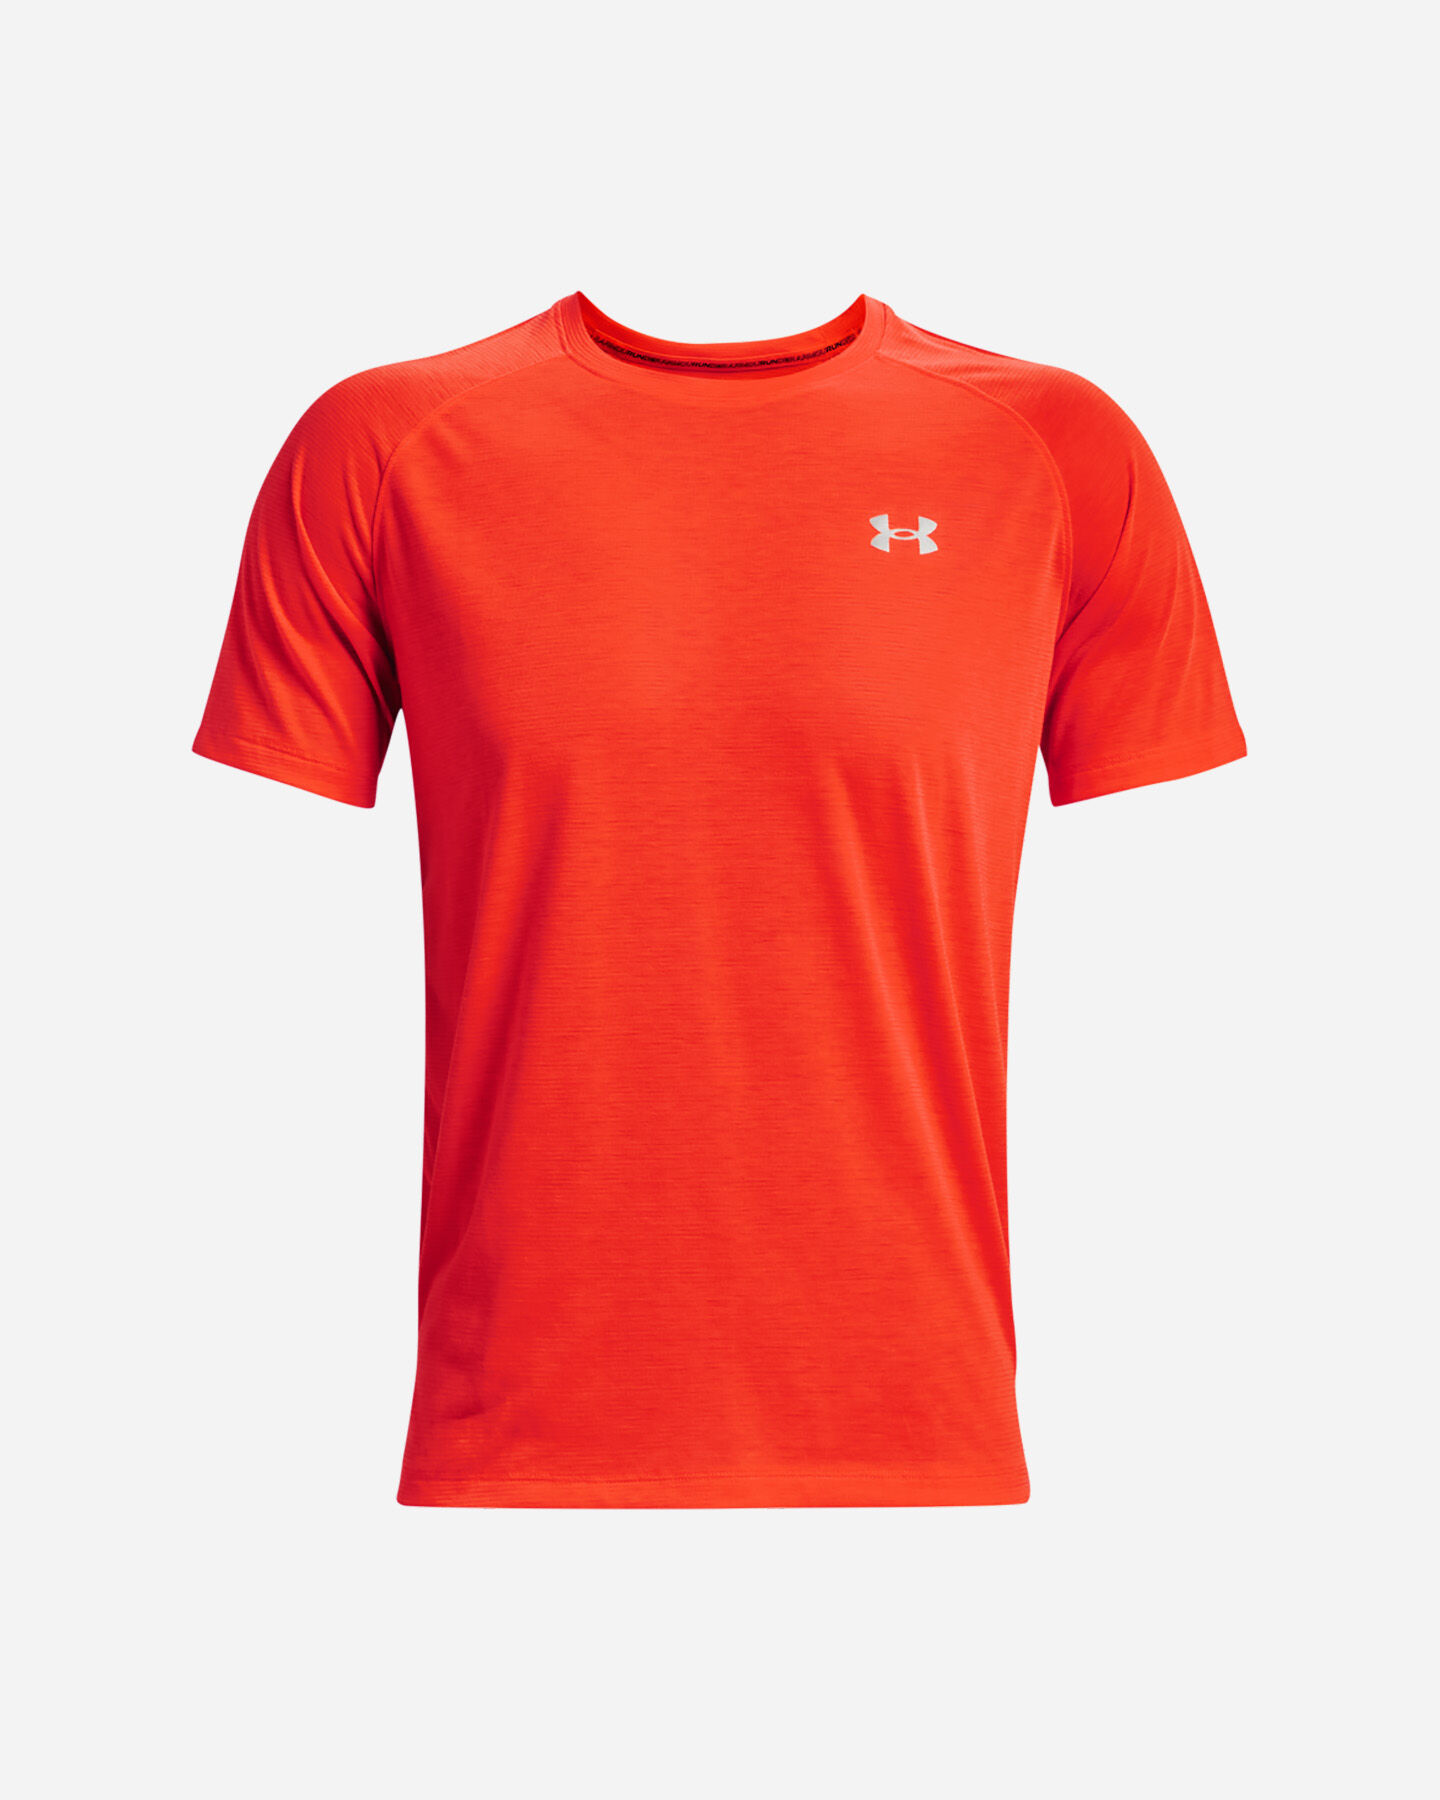  T-Shirt running UNDER ARMOUR STREAKER ROSSO M S5331860|0296|SM scatto 0